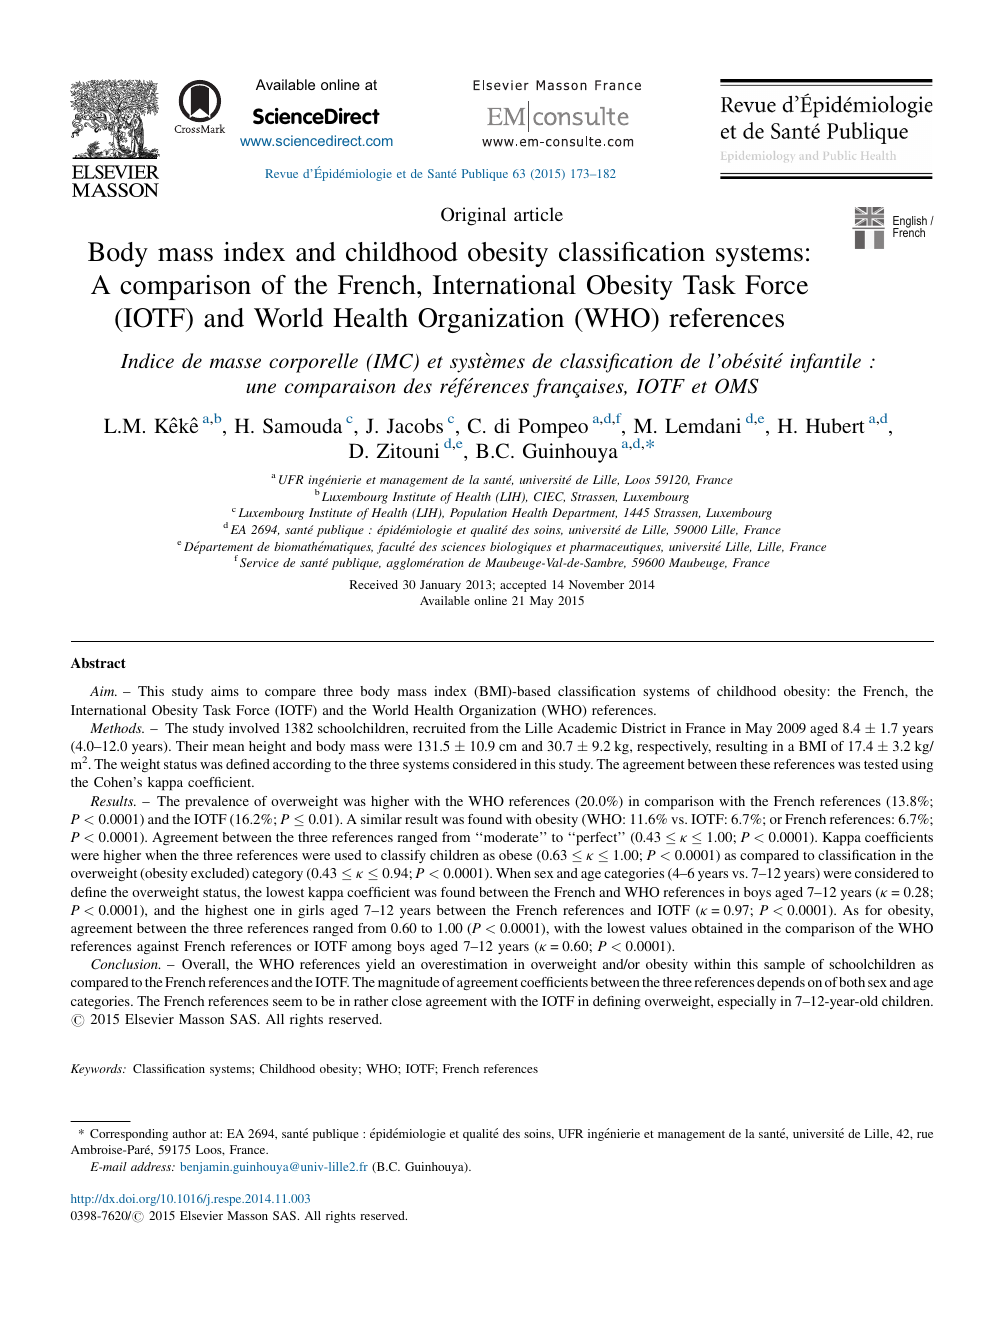 Body Mass Index And Childhood Obesity Classification Systems A